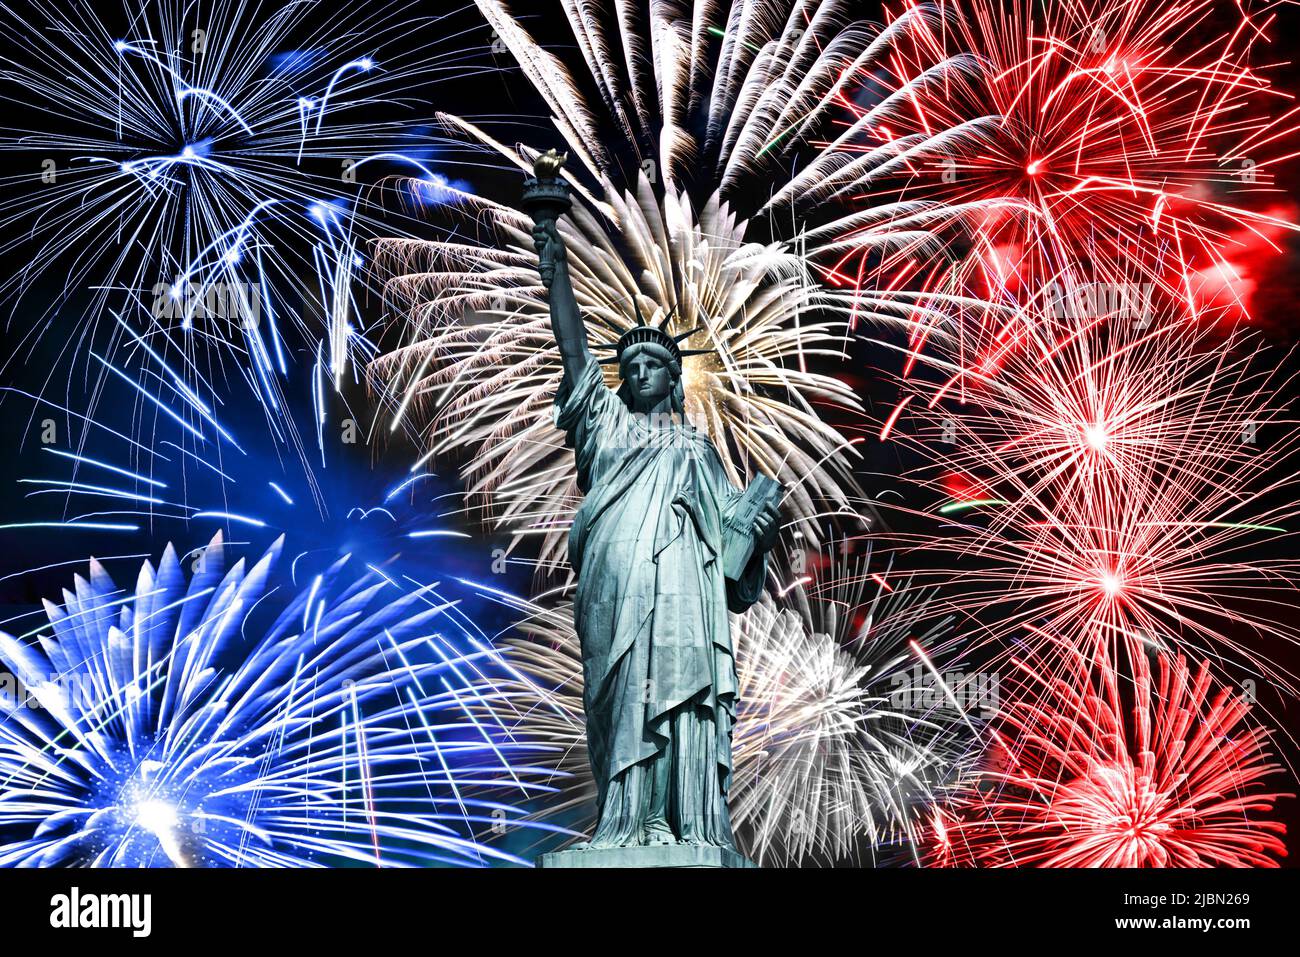 Statue of Liberty, blue white and red fireworks July 4th celebration in New York Stock Photo